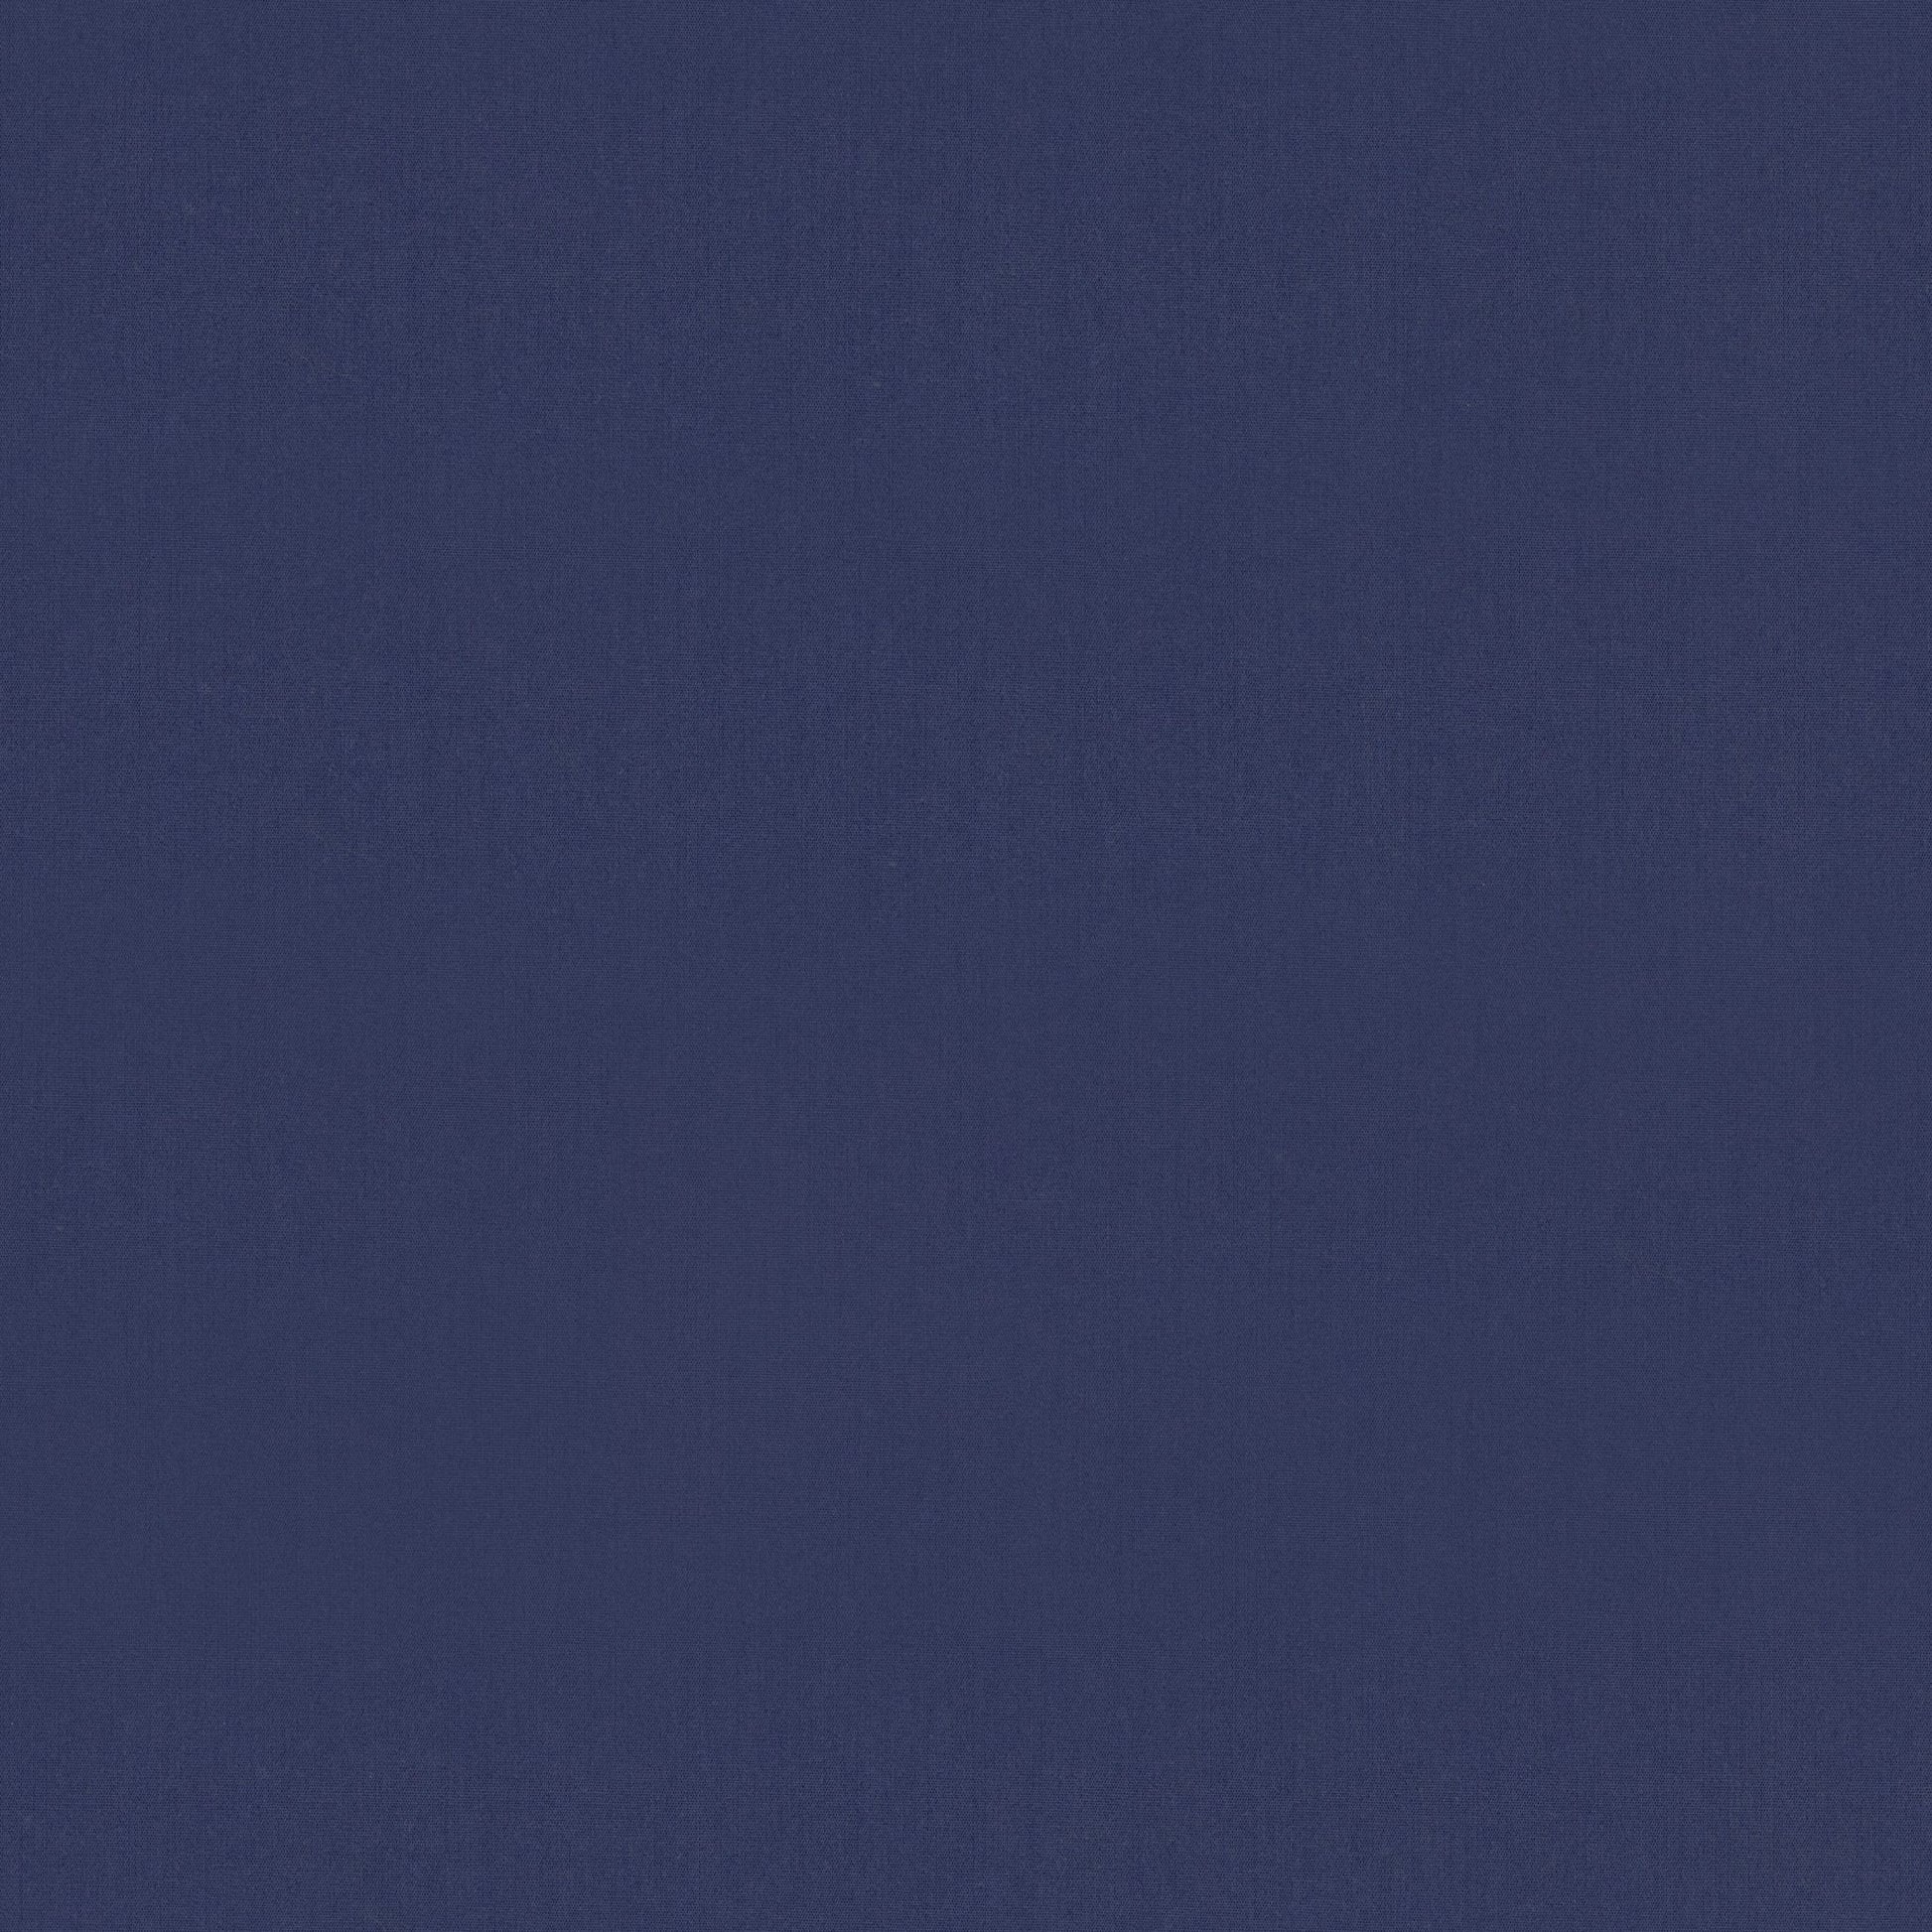 Solid Navy Swatch - New Arrivals Inc